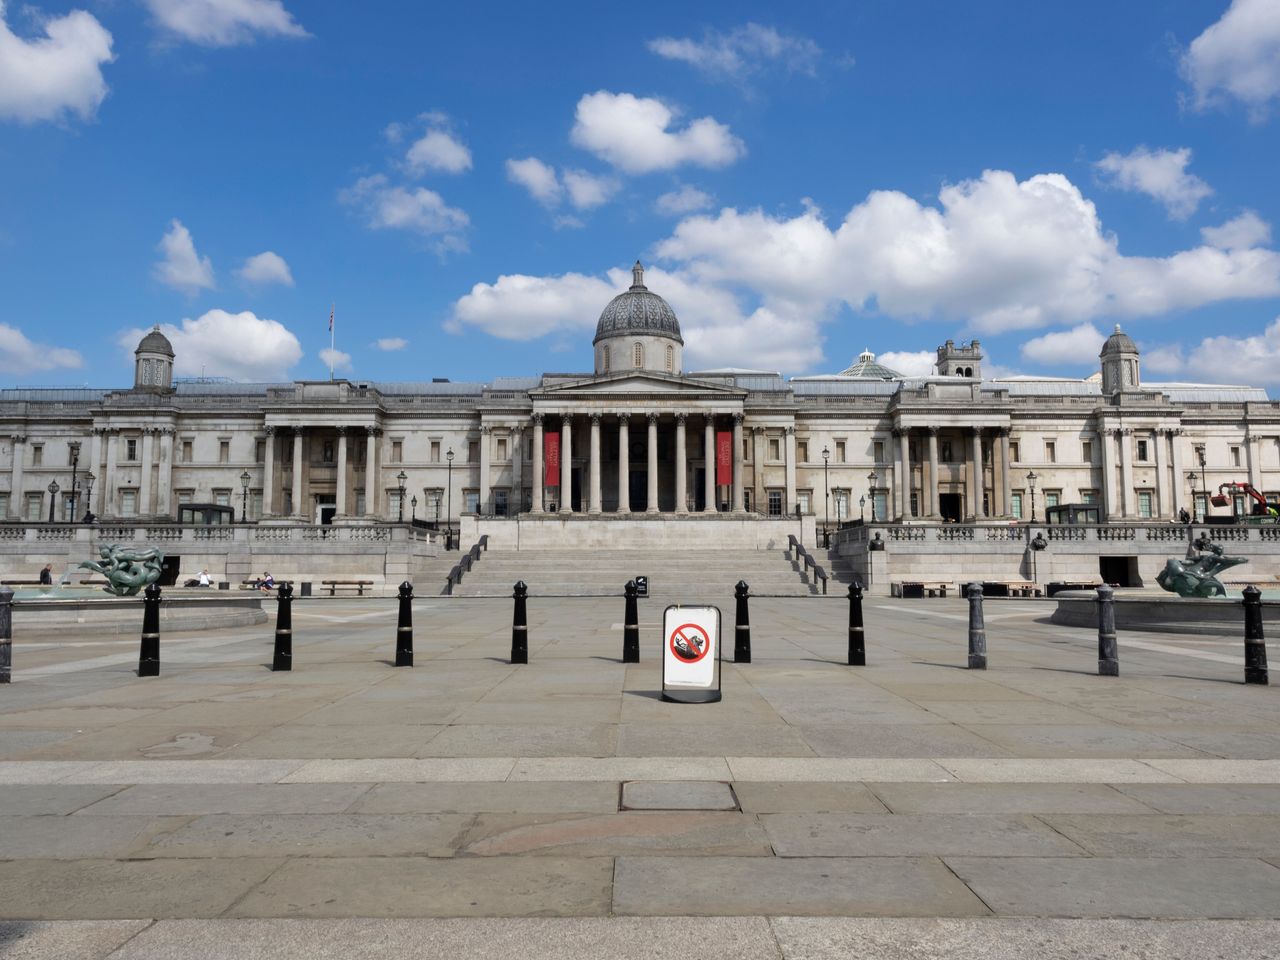 Trafalgar Square and the National Gallery in London on May 4